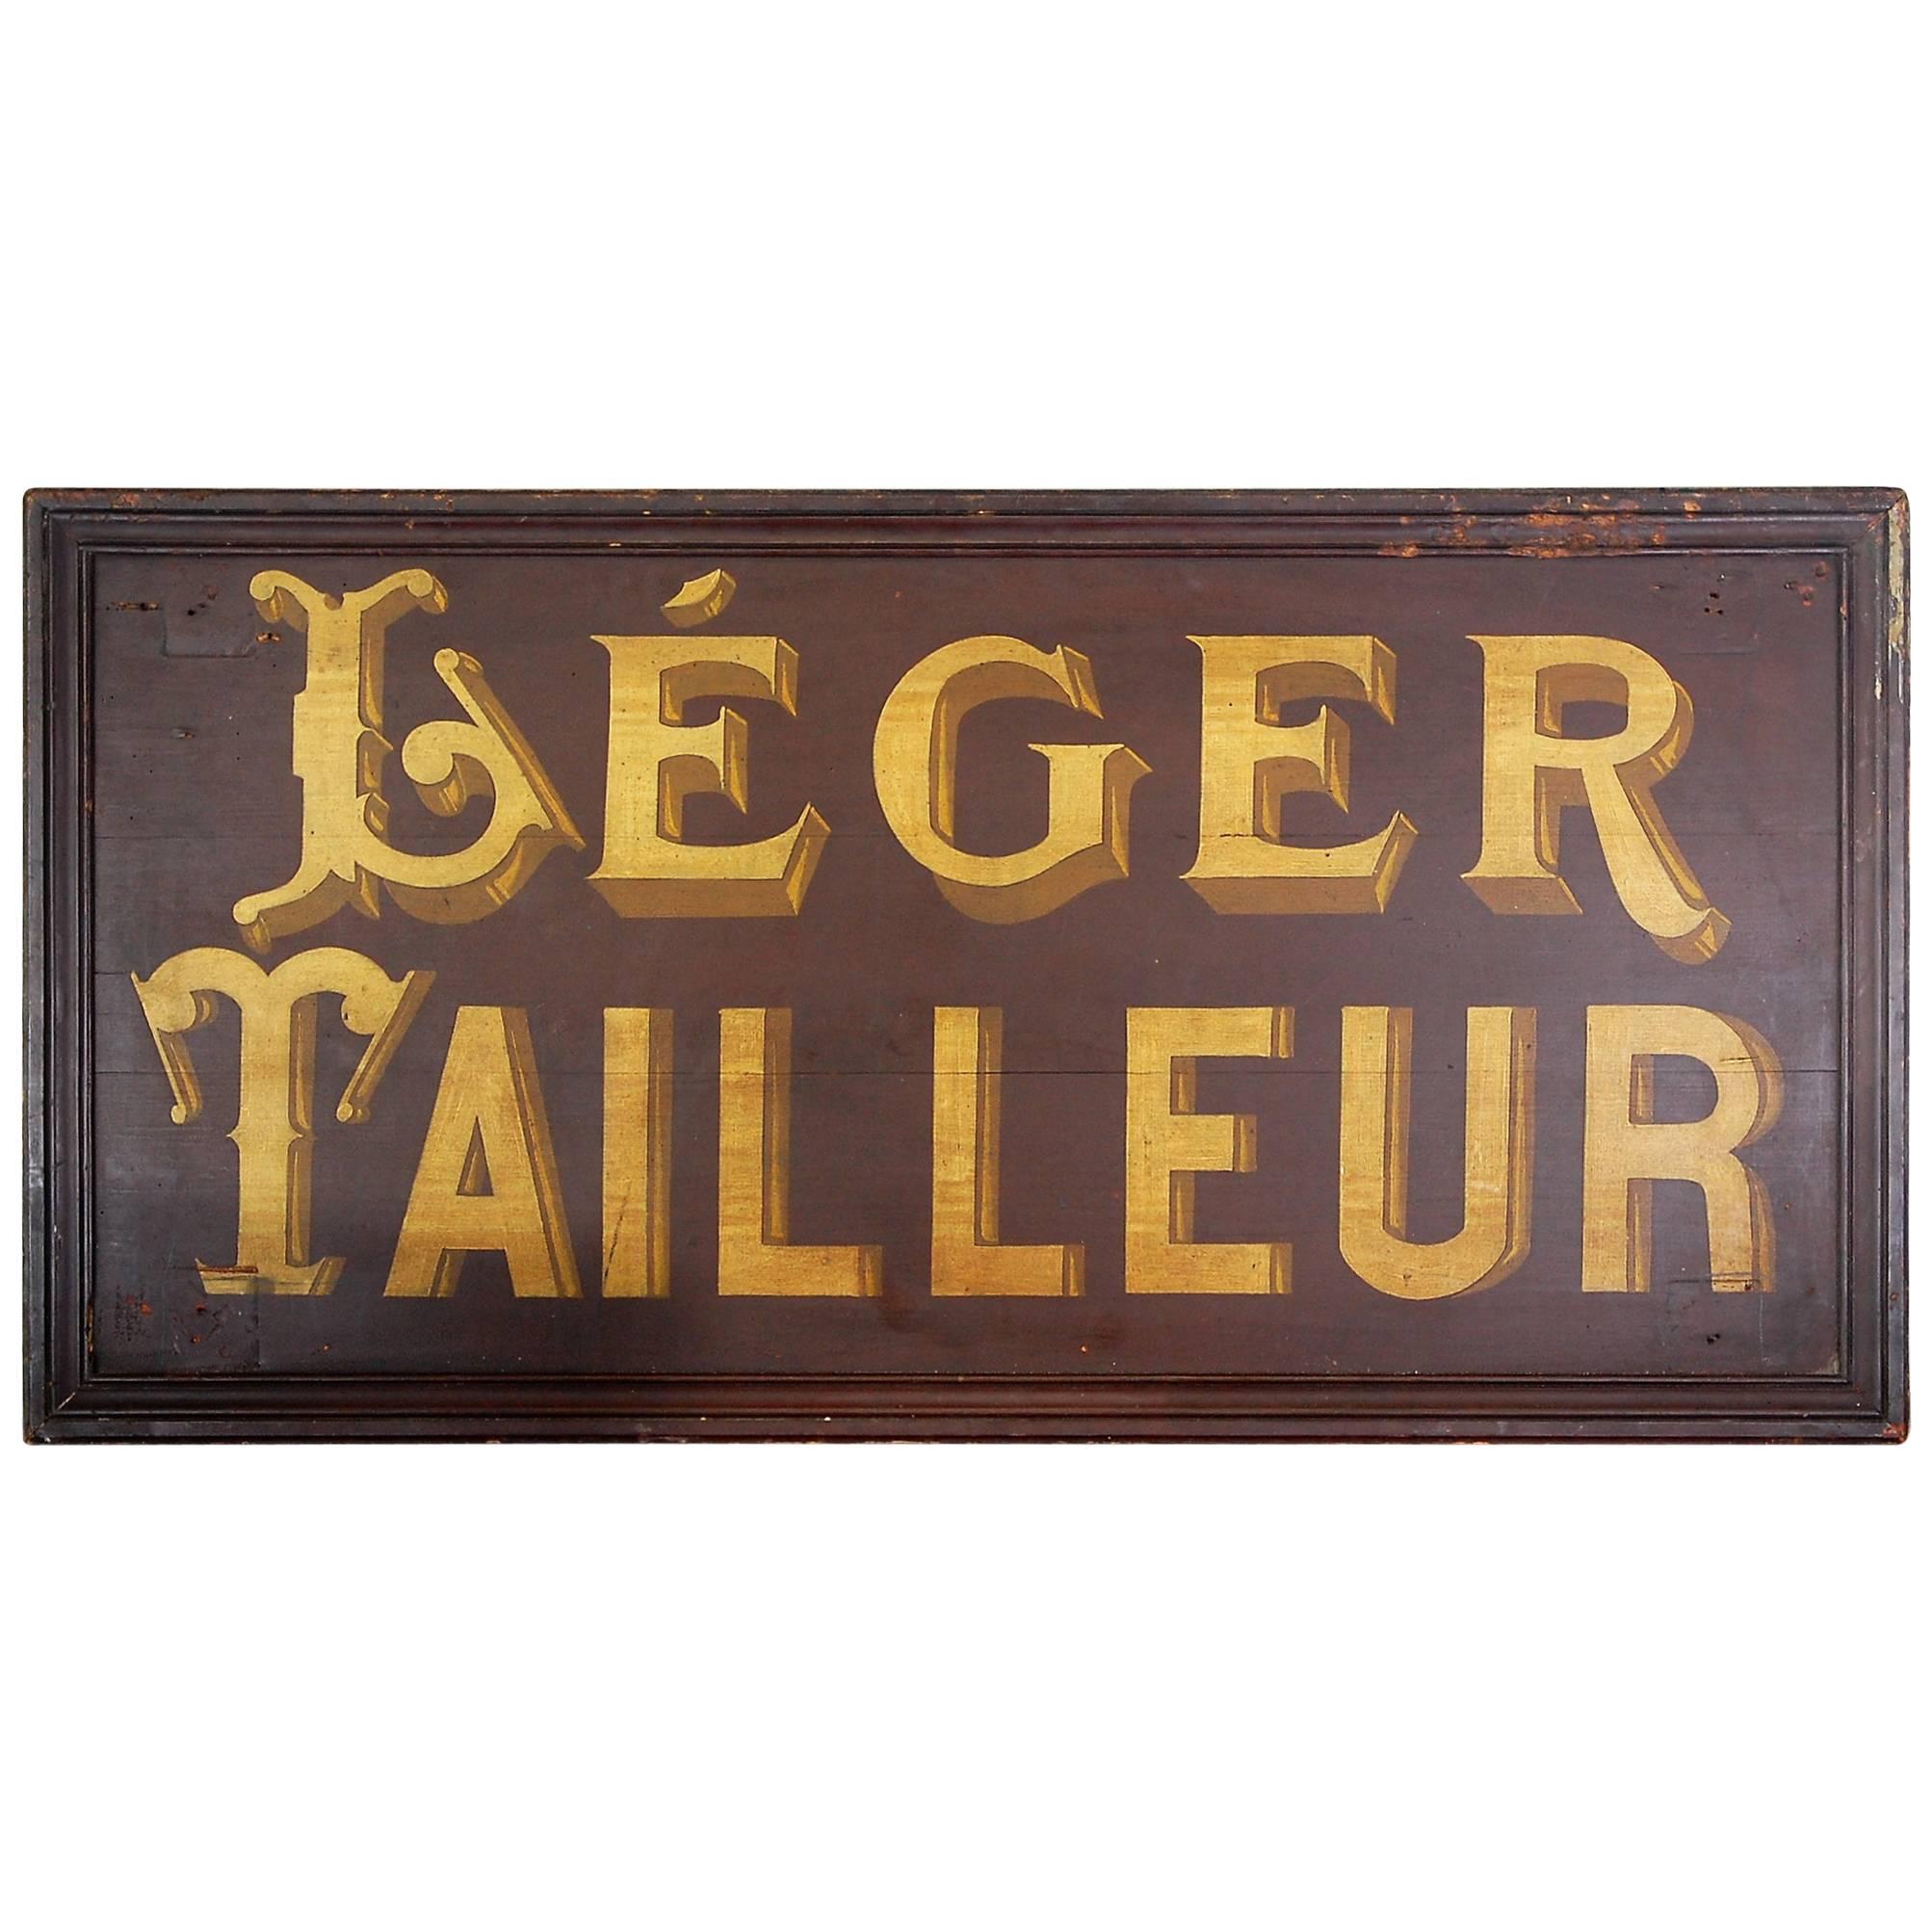 French Tailors Trade Sign Hand-Painted Wood, Early 20th Century